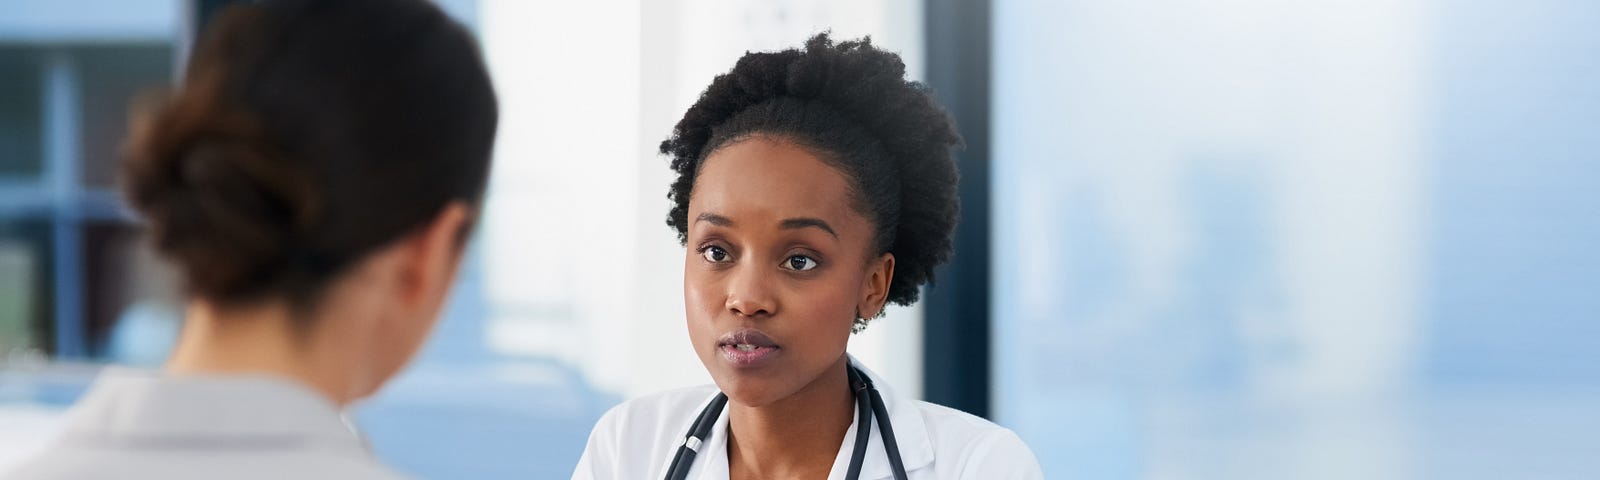 A cropped shot of a doctor, who is a woman of color, talking to a patient in her office.